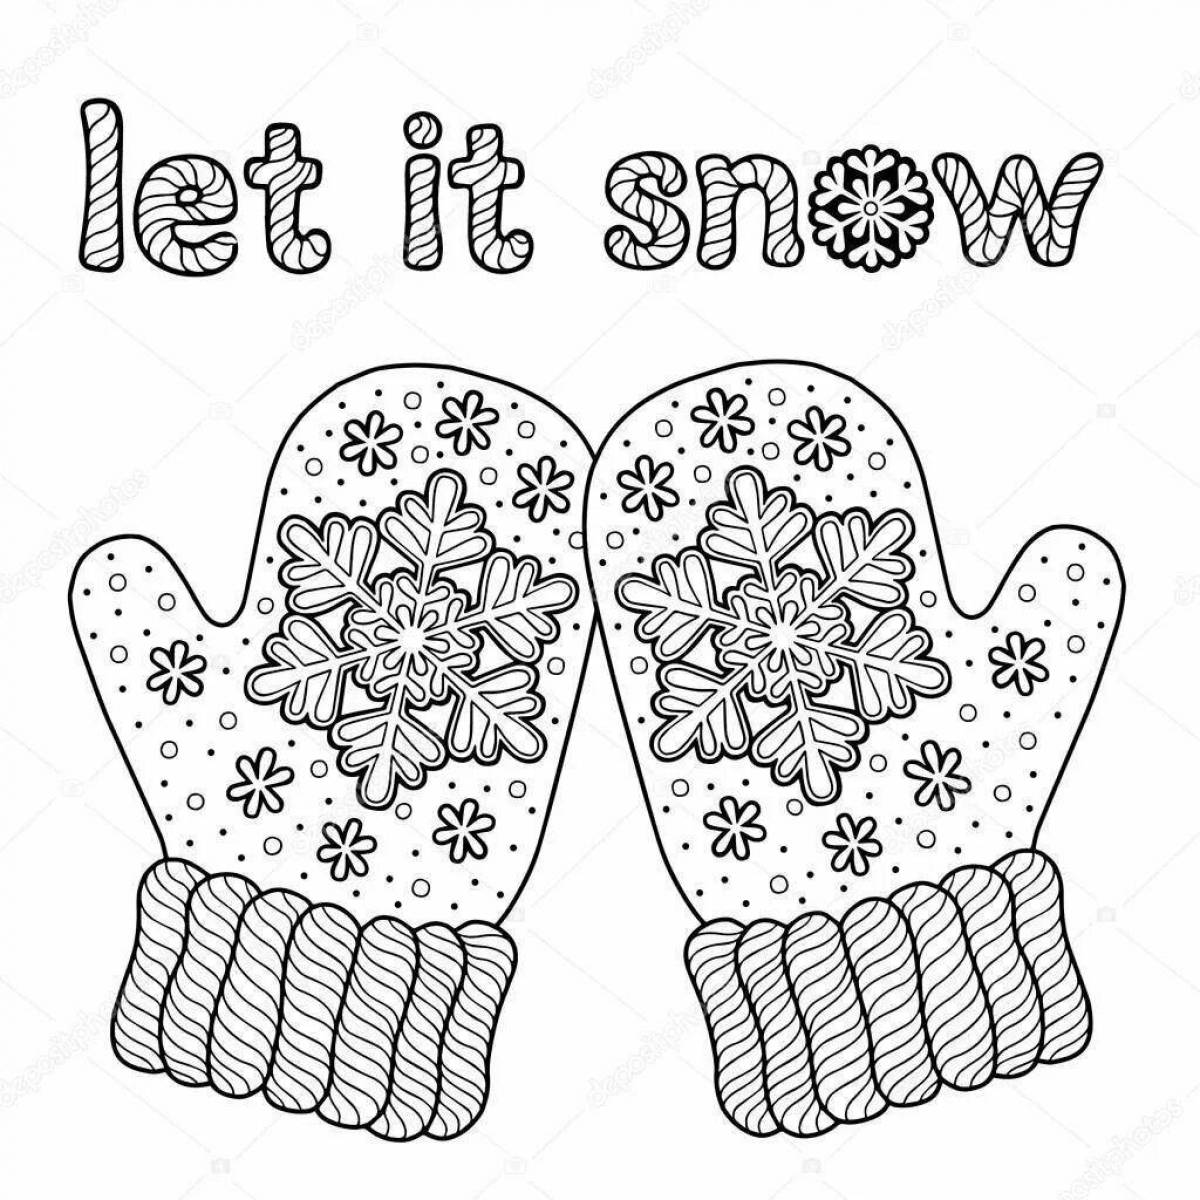 Coloring book nice mittens for children 4-5 years old